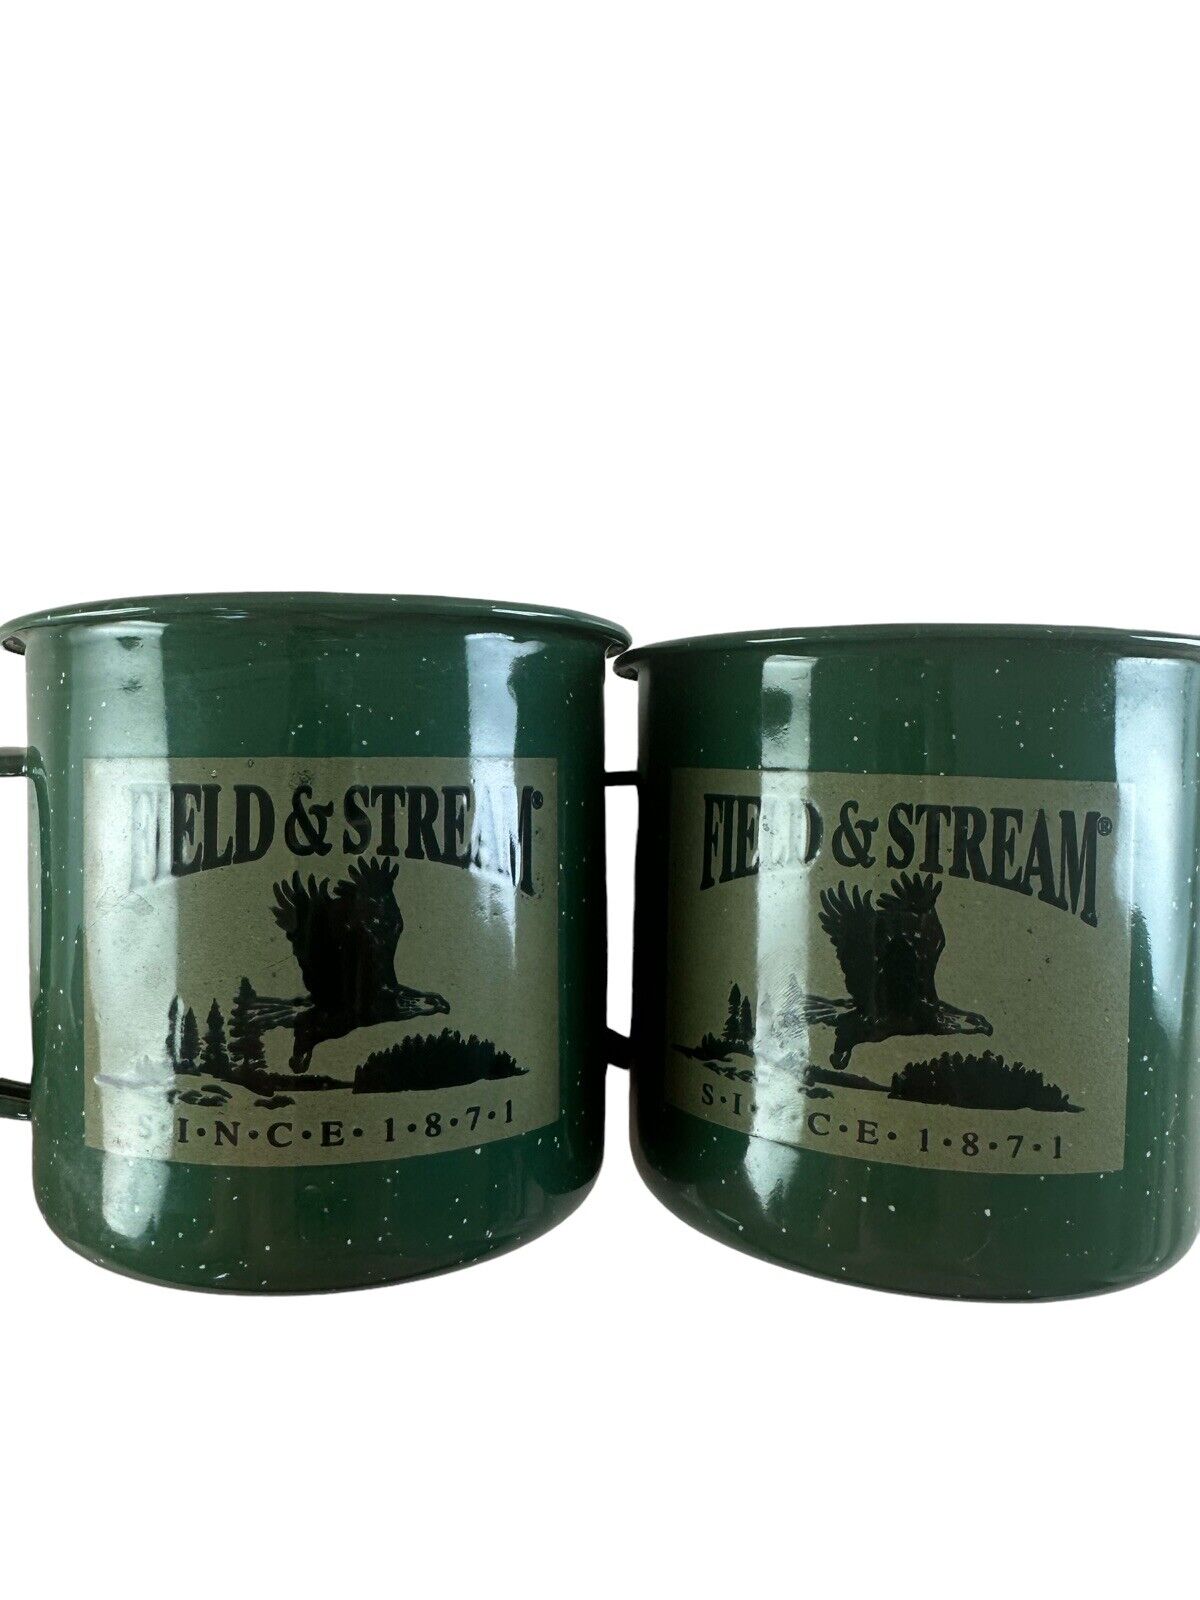 Set of 2 FIELD & STREAM Camp Cups Mugs Green Speckled Enamel Ware 22 oz. GUC